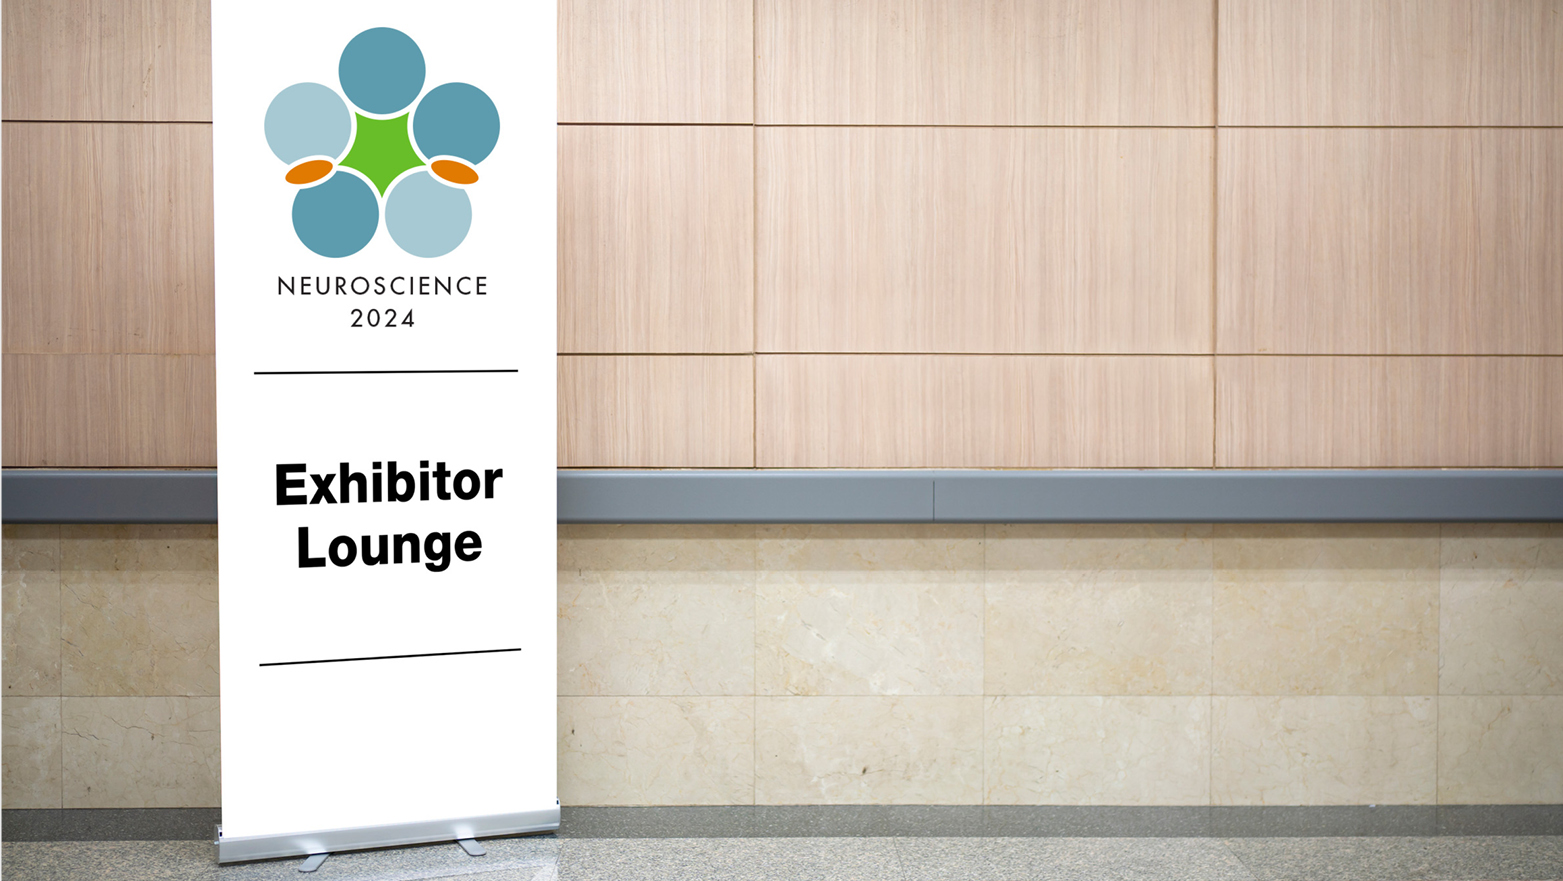 Example of Exhibitor Lounge ad at Neuroscience 2024